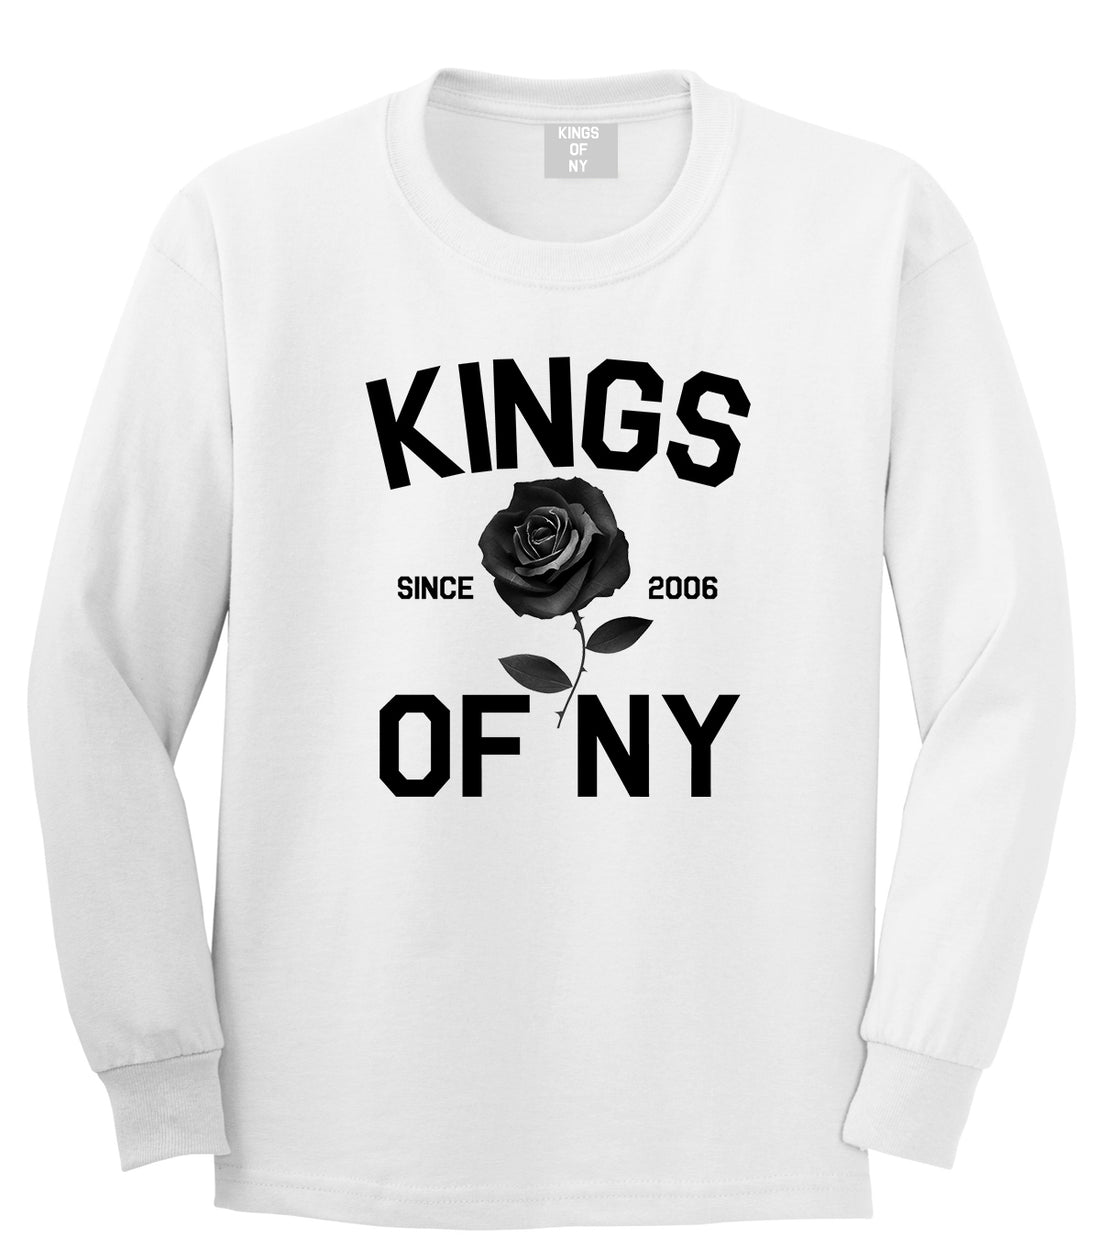 Black Rose Since 2006 Mens Long Sleeve T-Shirt White by Kings Of NY